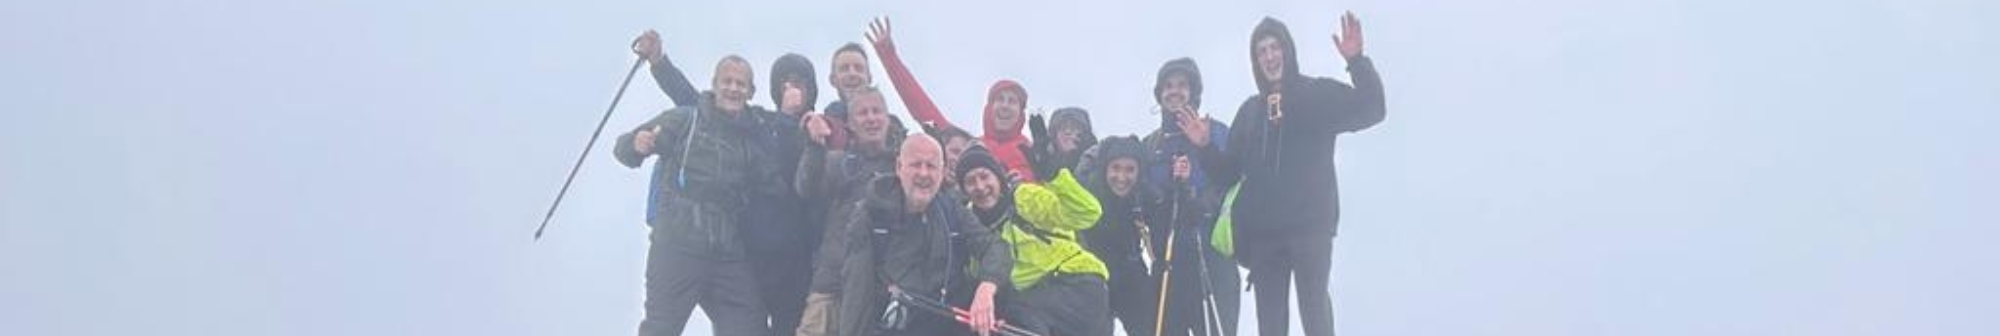 group-of-hikers-at-the-peak-of-a-mountain